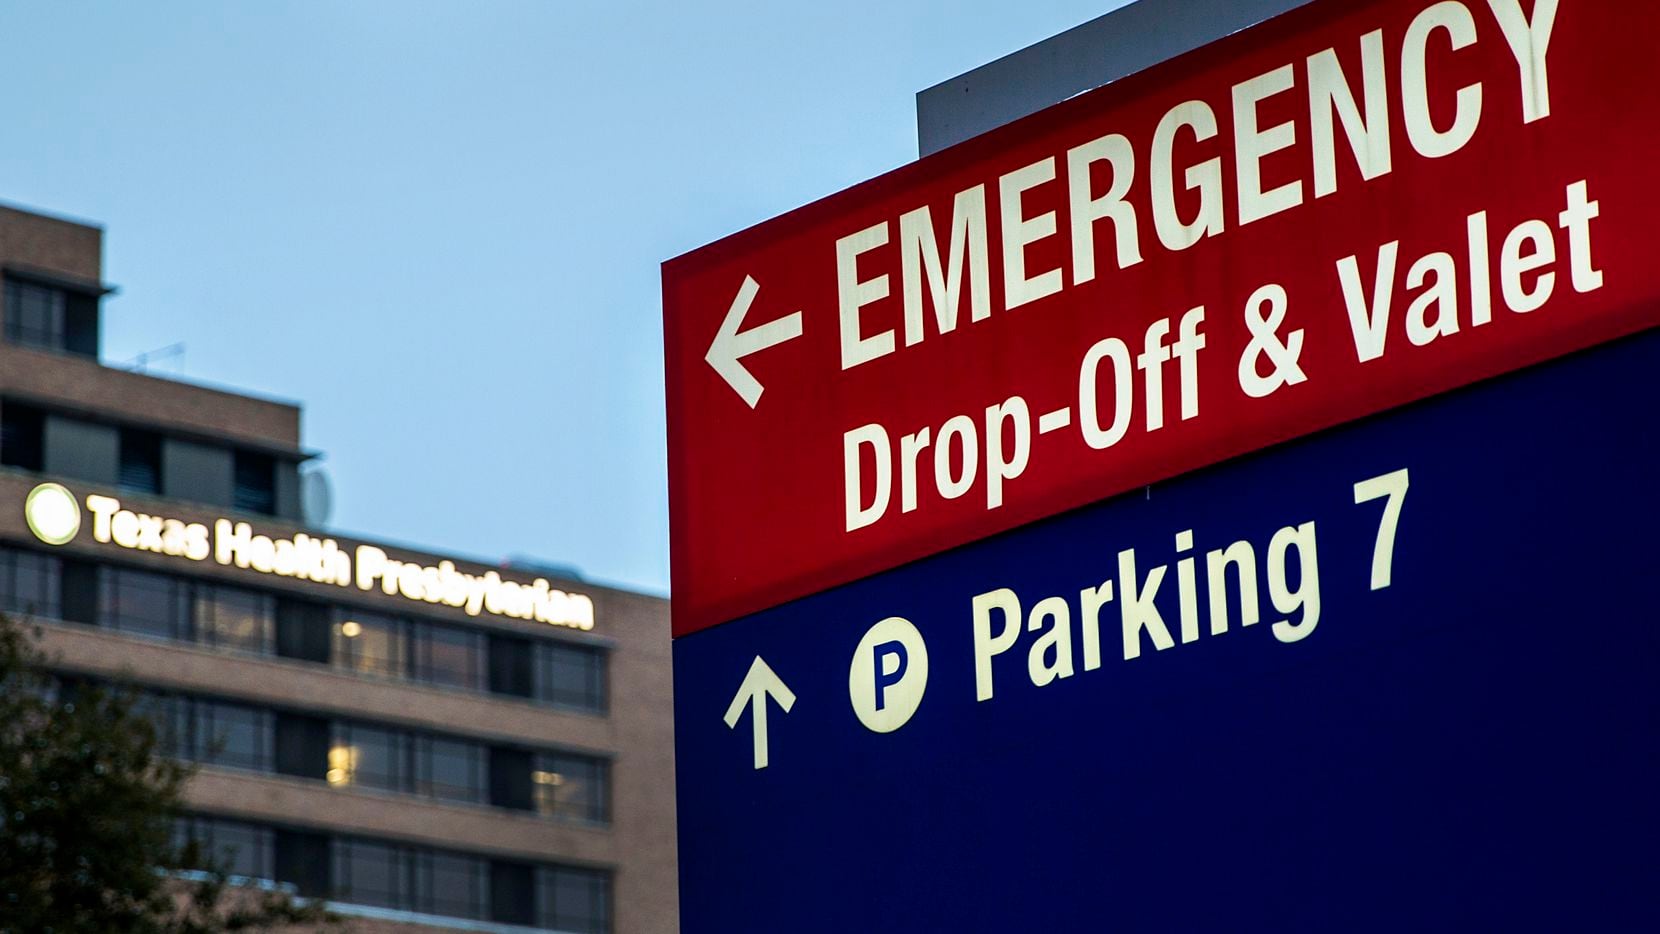 Texas Health Resources, which operates Presbyterian hospital in Dallas, has had a recovery...